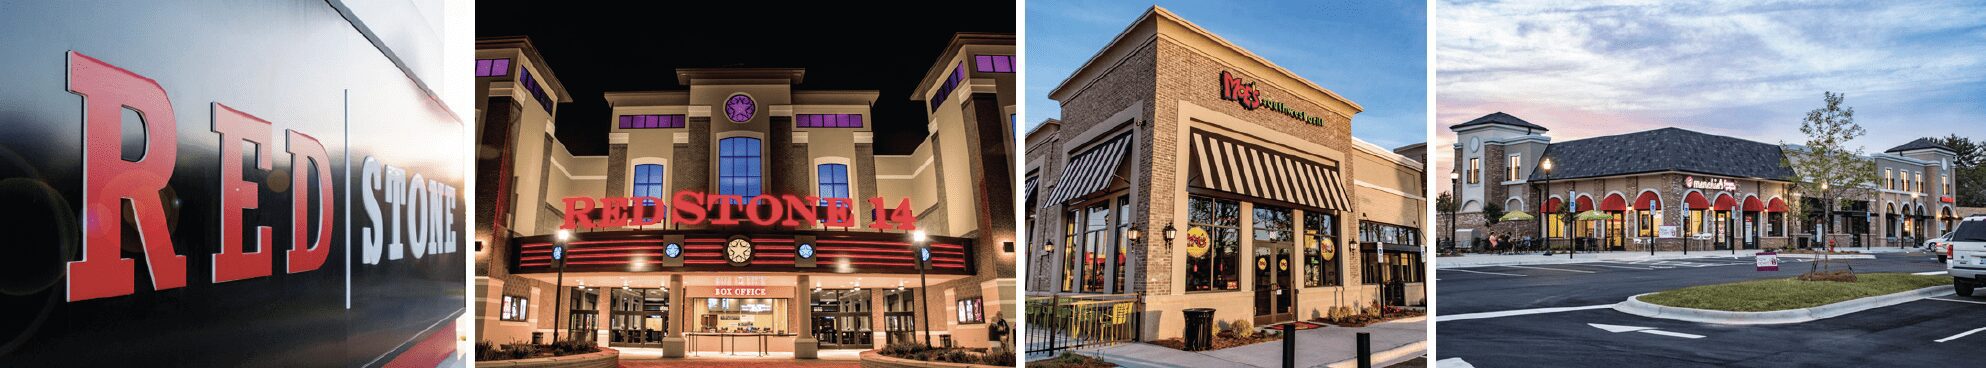 RedStone Phase I images with monument sign, Stone Theatres movie theater, Moe's and Menchie's